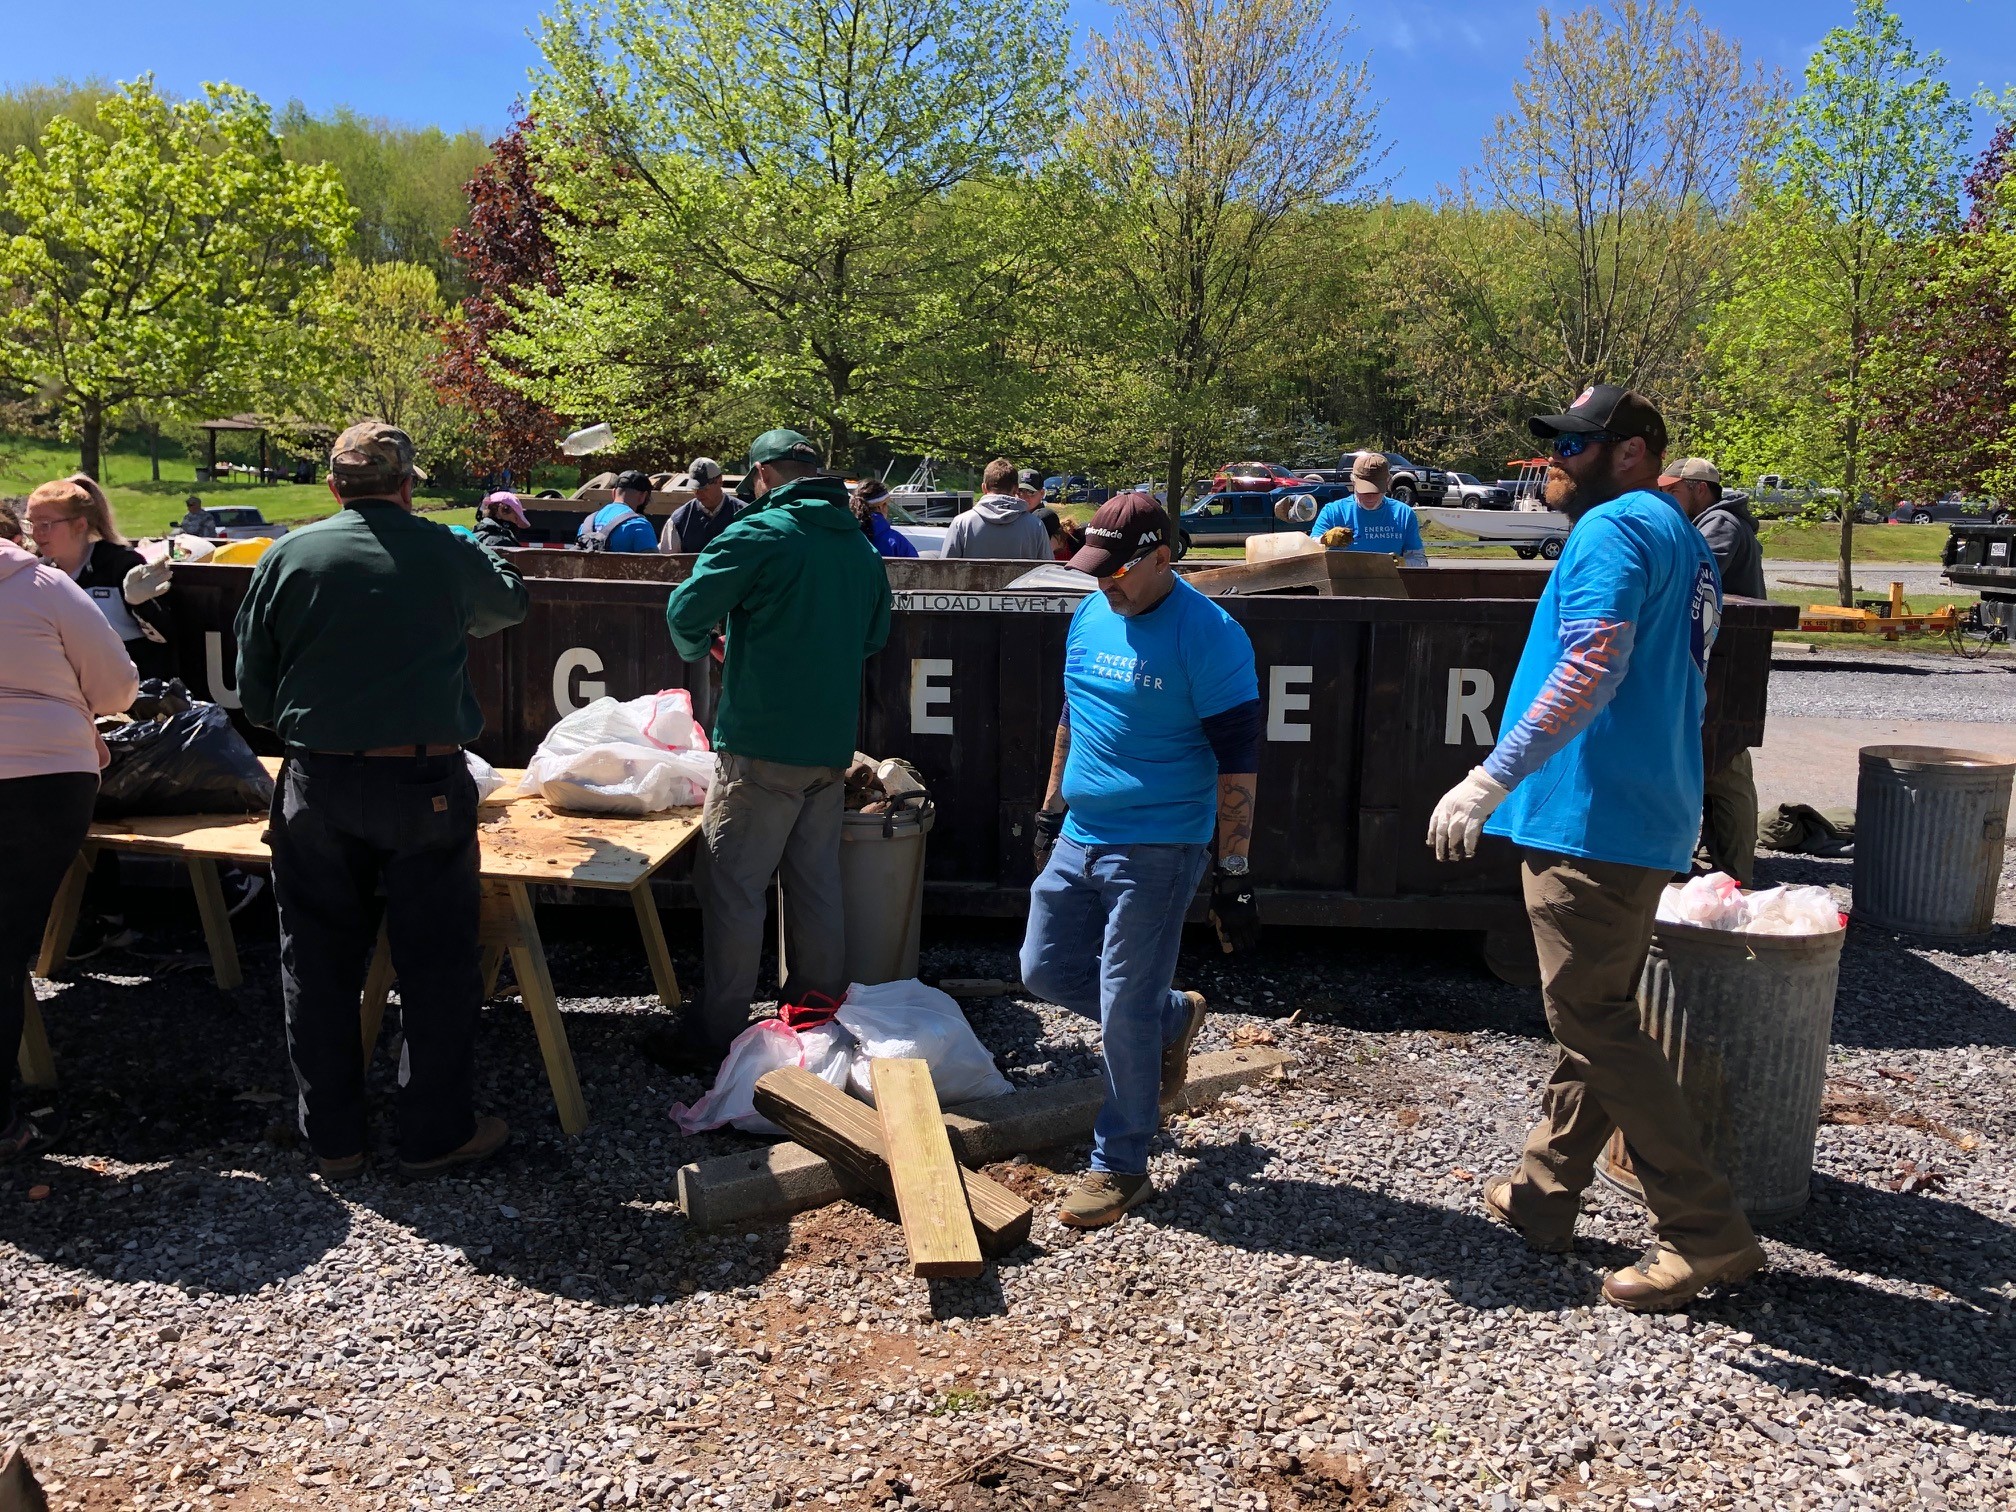 RaystownCleanup11 - Celebrating Earth Day in Pennsylvania